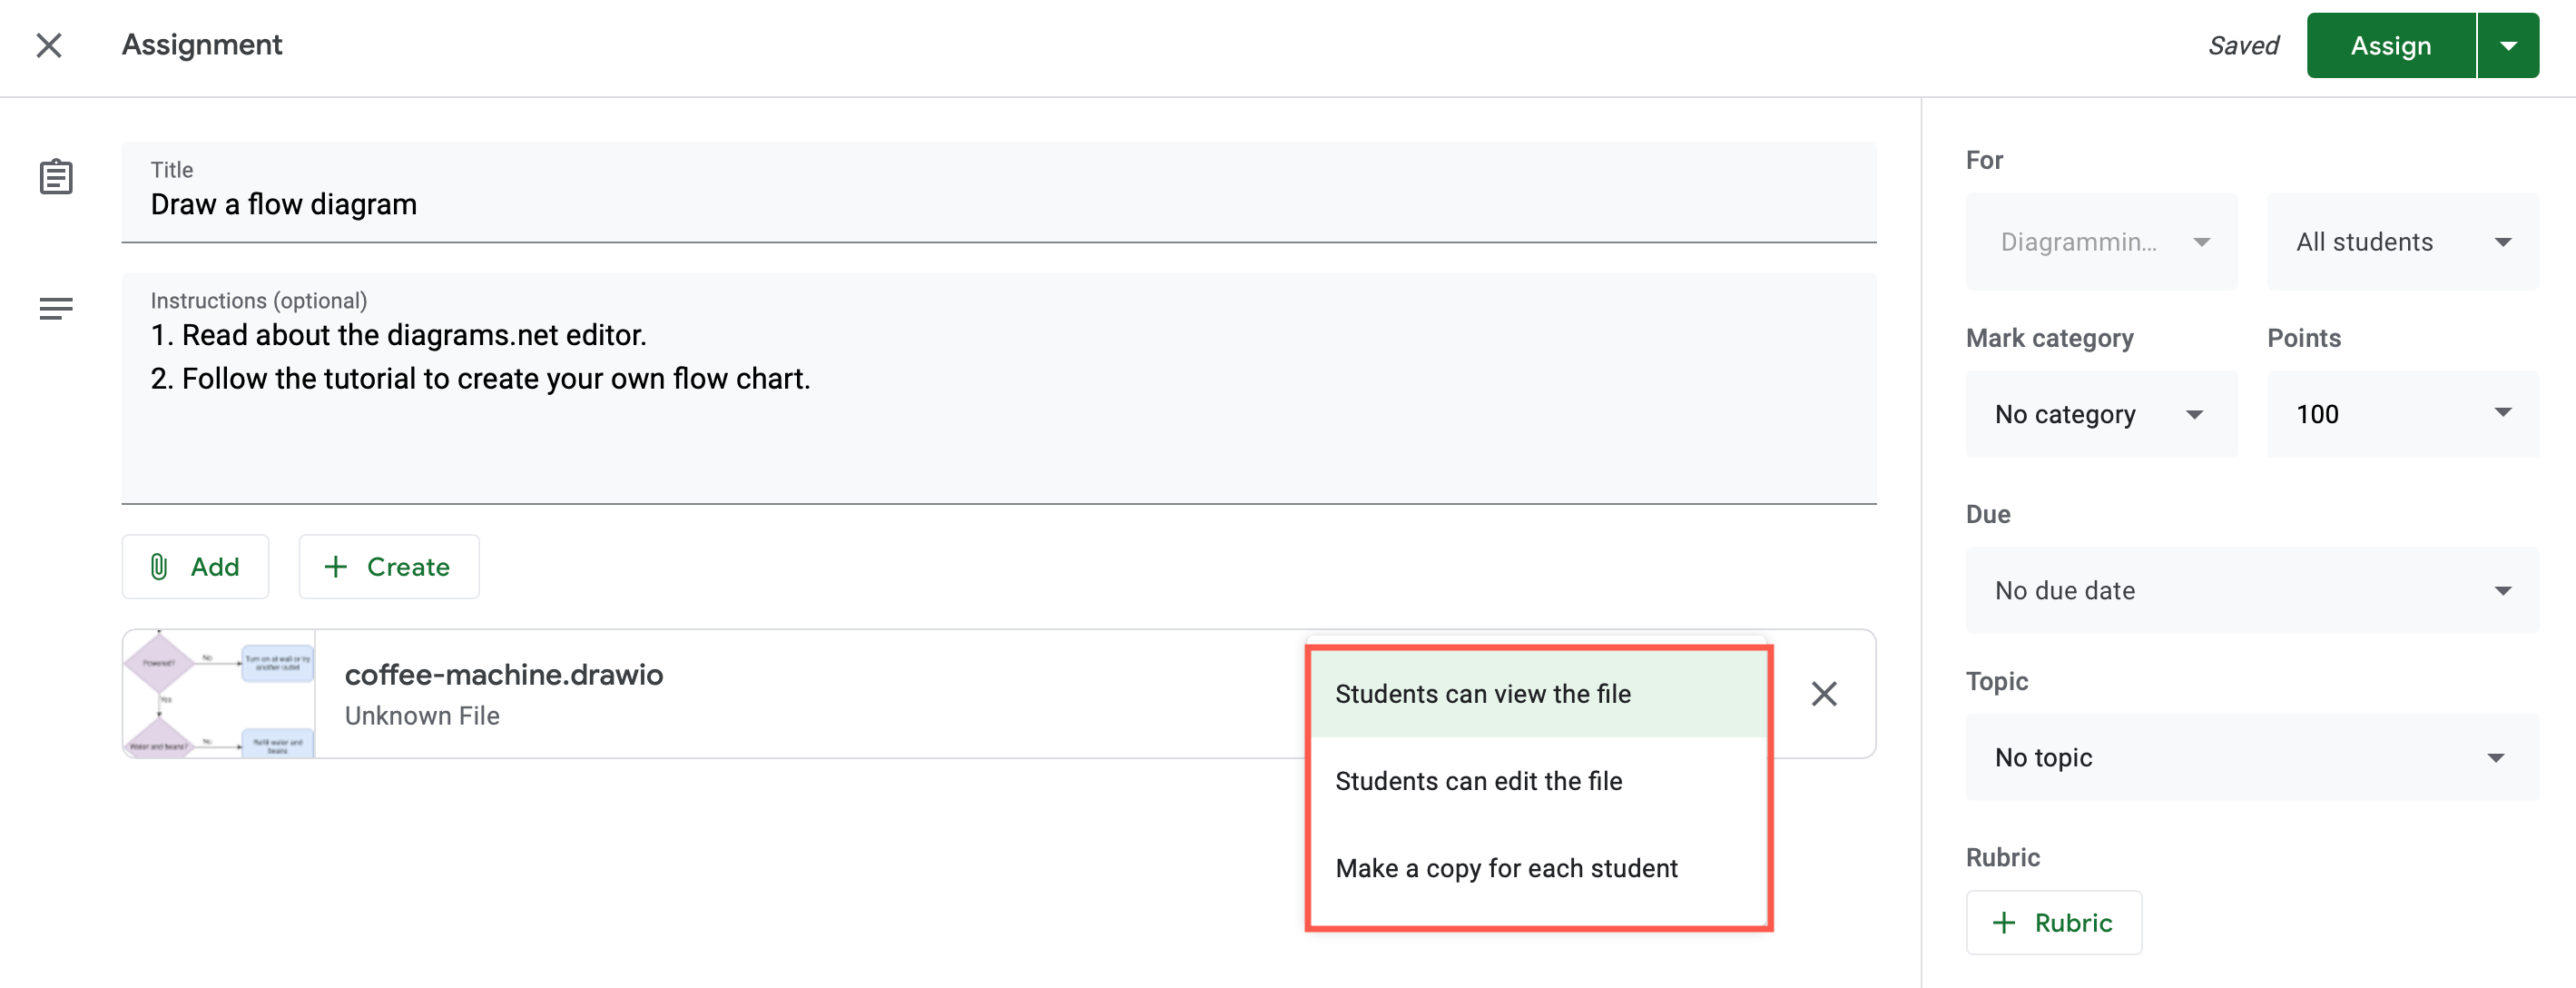 Select whether students can view or edit the diagram file, or if they automatically get their own copy in their Google Drives on diagrams attached to assignments in Google Classroom